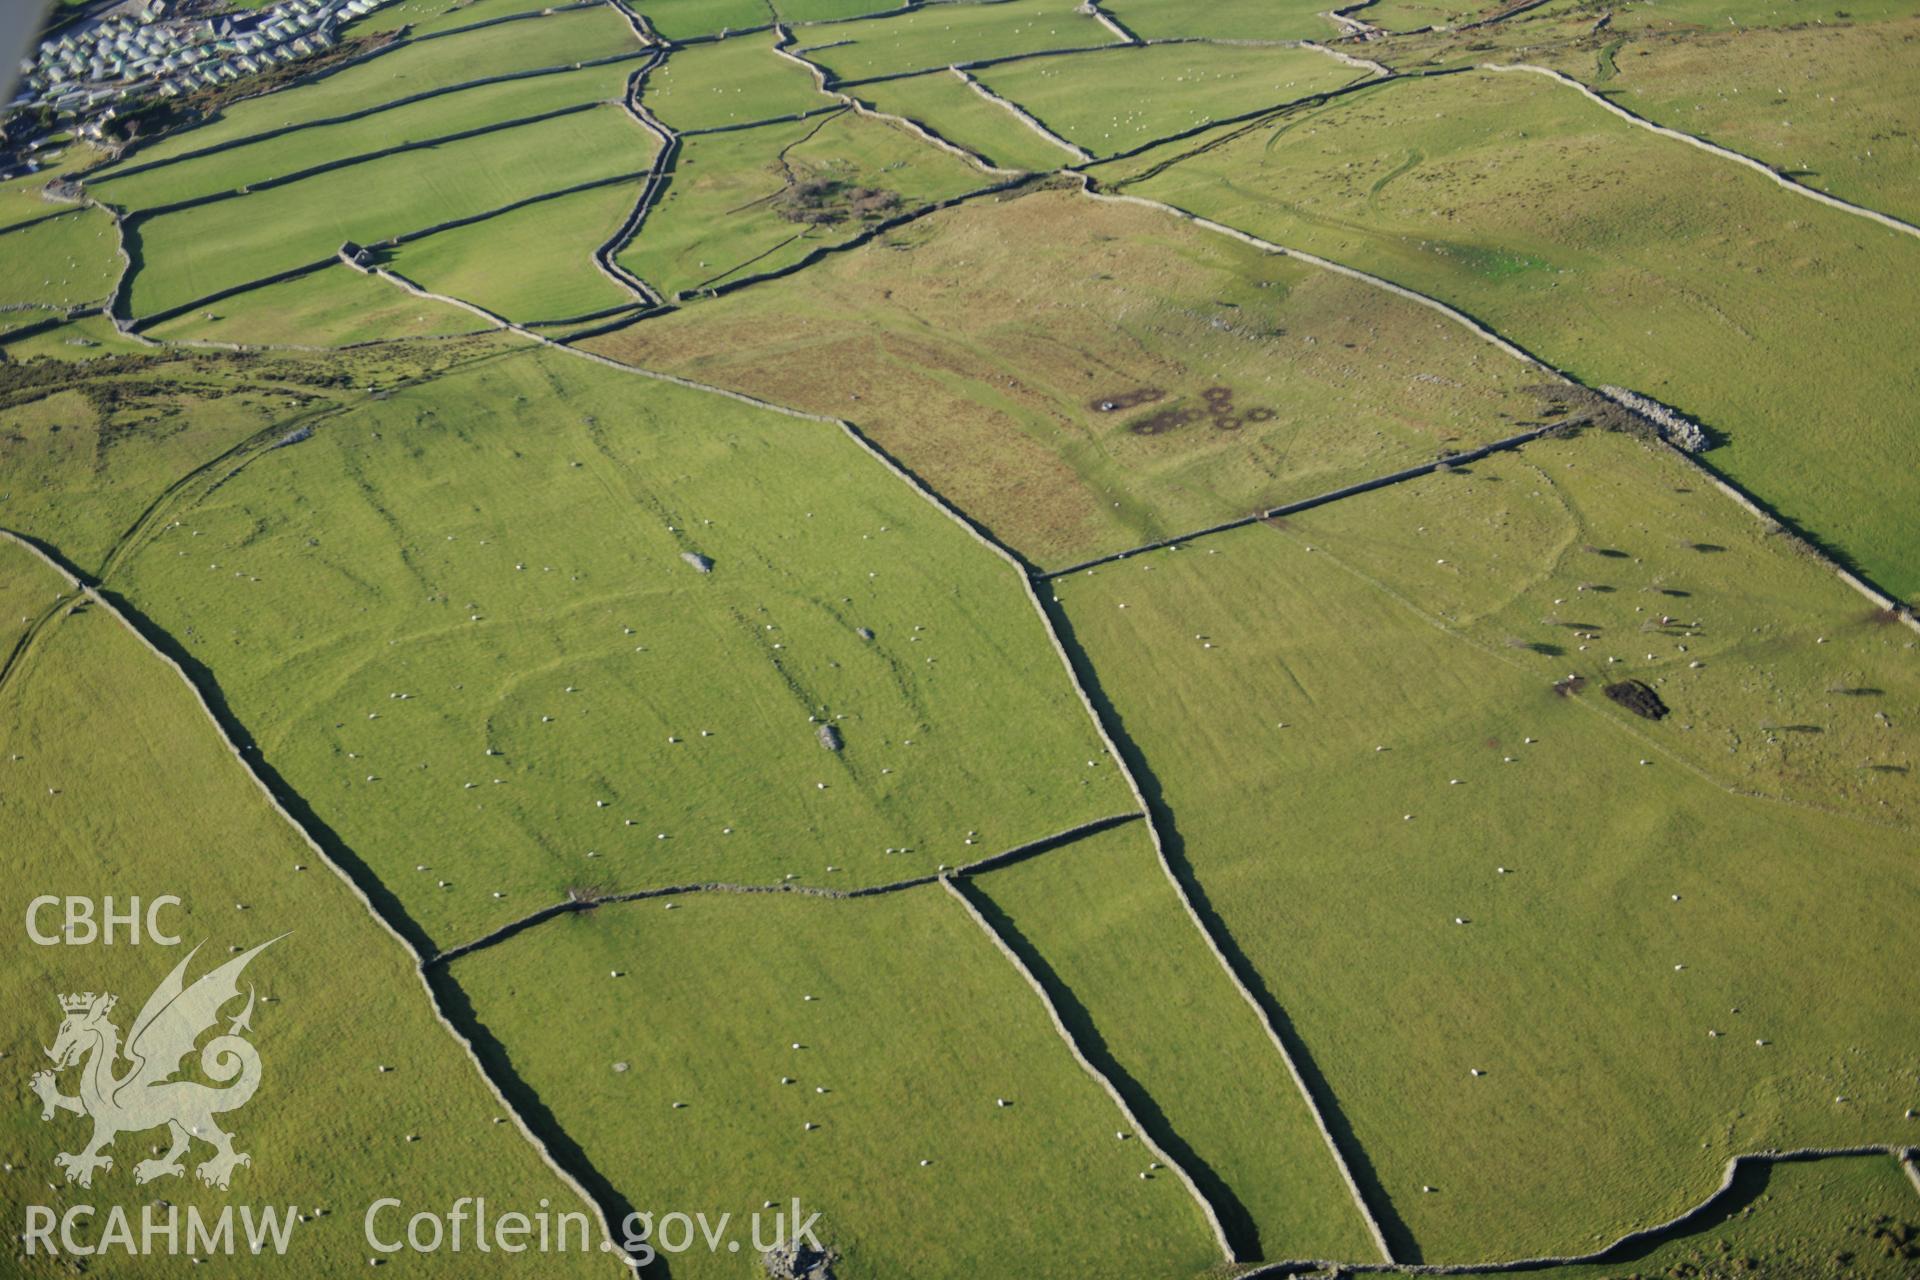 RCAHMW colour oblique photograph of Hendre Coed Uchaf concentric enclosures. Taken by Toby Driver on 10/12/2012.